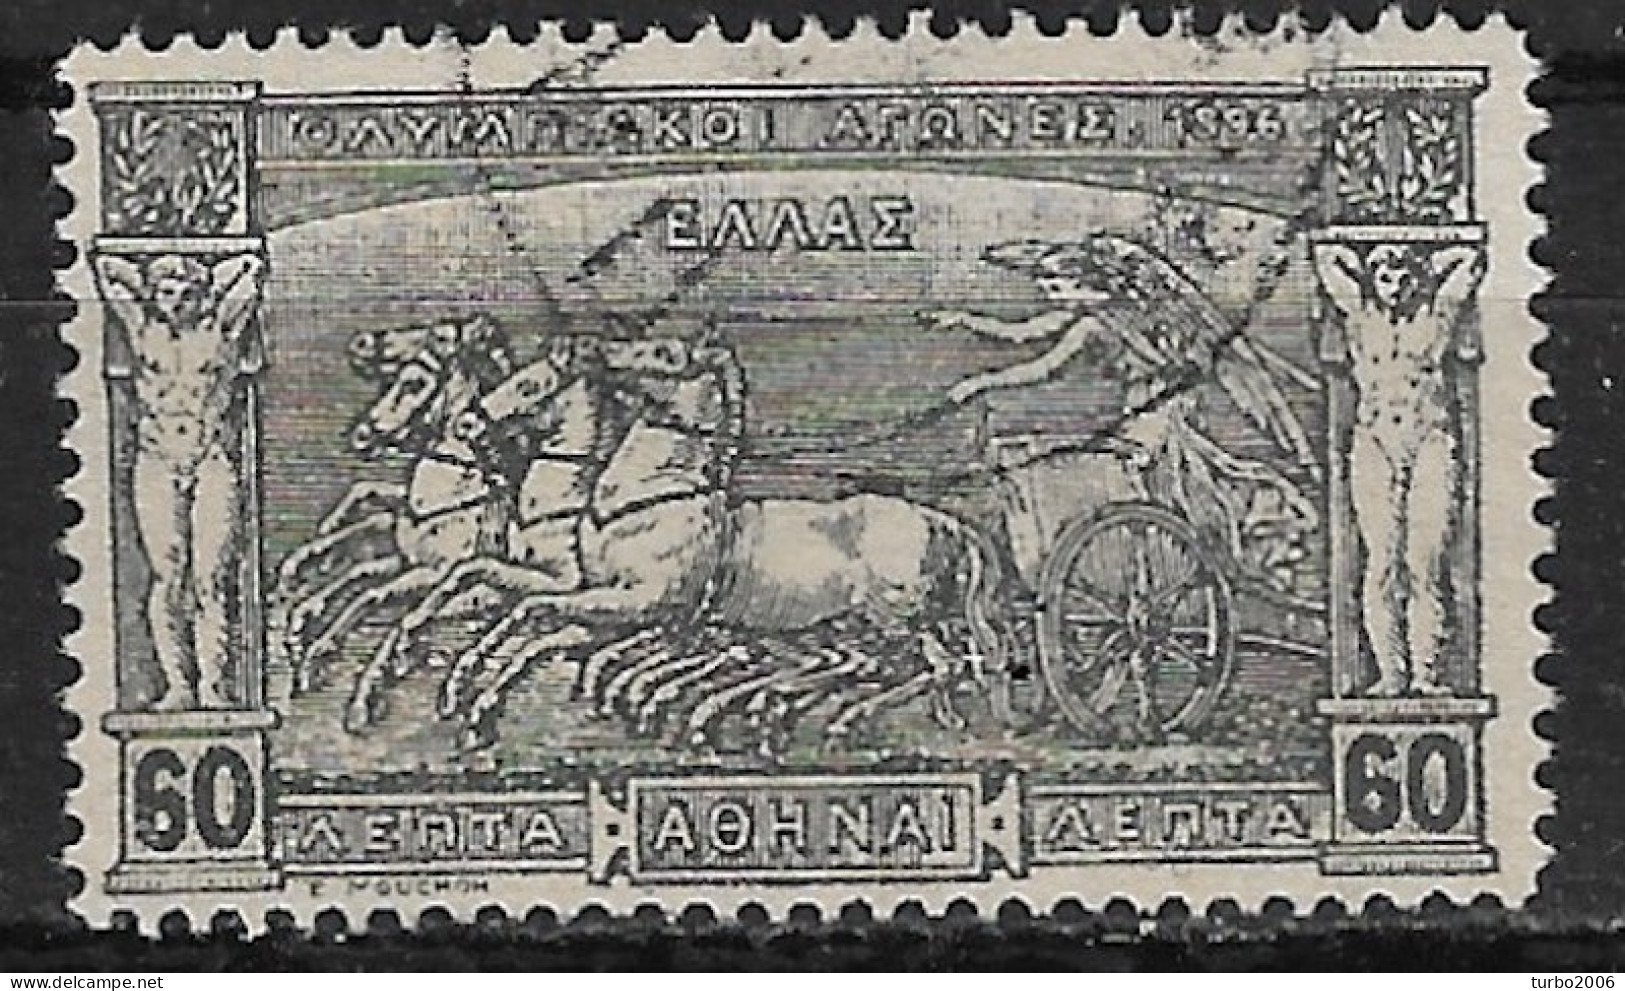 GREECE 1896 First Olympic Games 60 Lepta Black Vl. 140 Interesting Classic Forgery With Fake Cancellation ΠΑΤΡΑΙ - Gebraucht